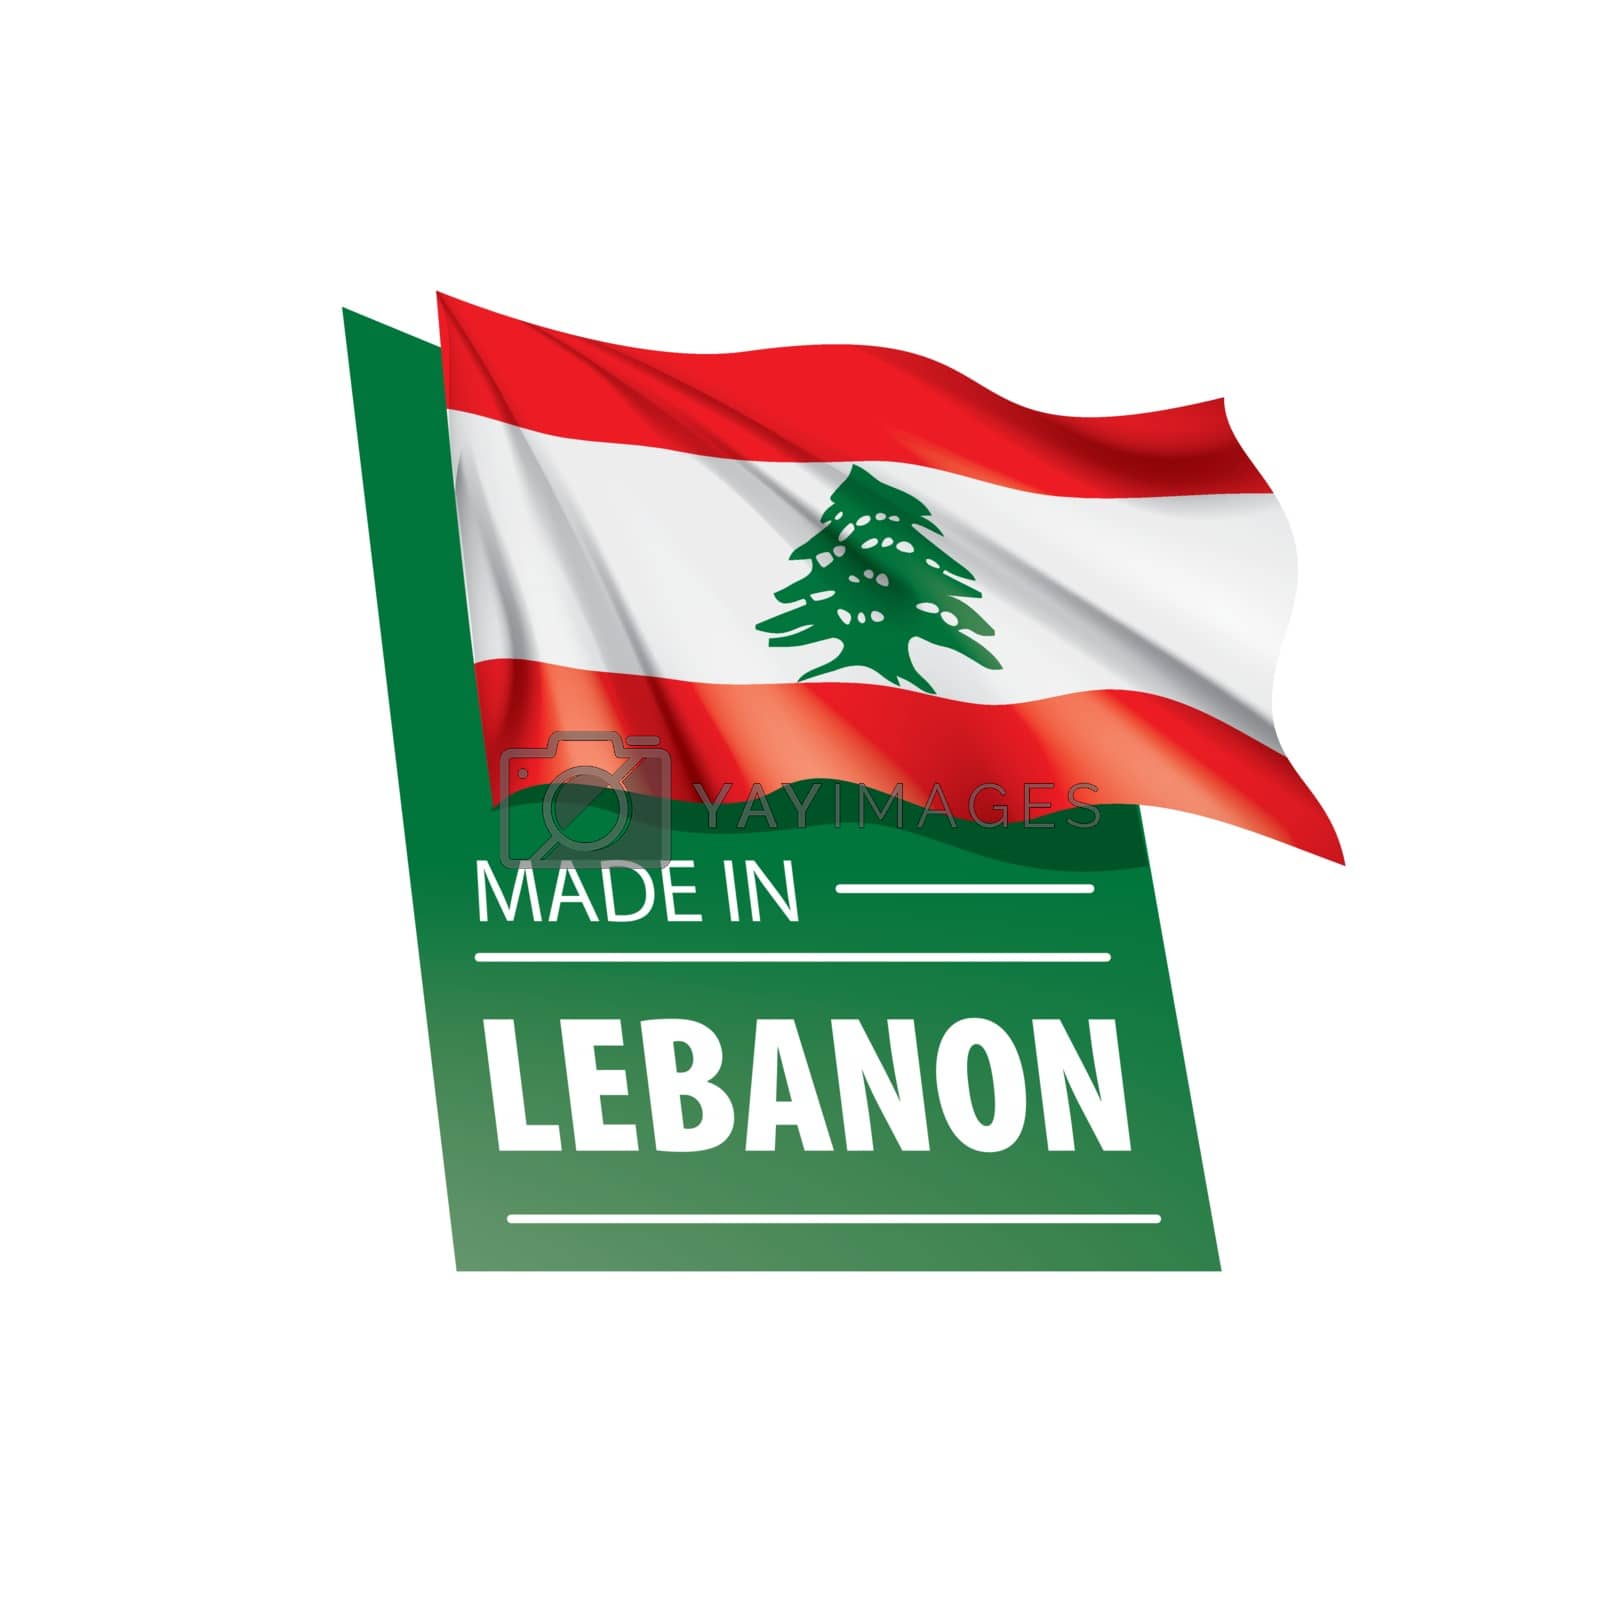 Royalty free image of Lebanese flag, vector illustration on a white background by butenkow